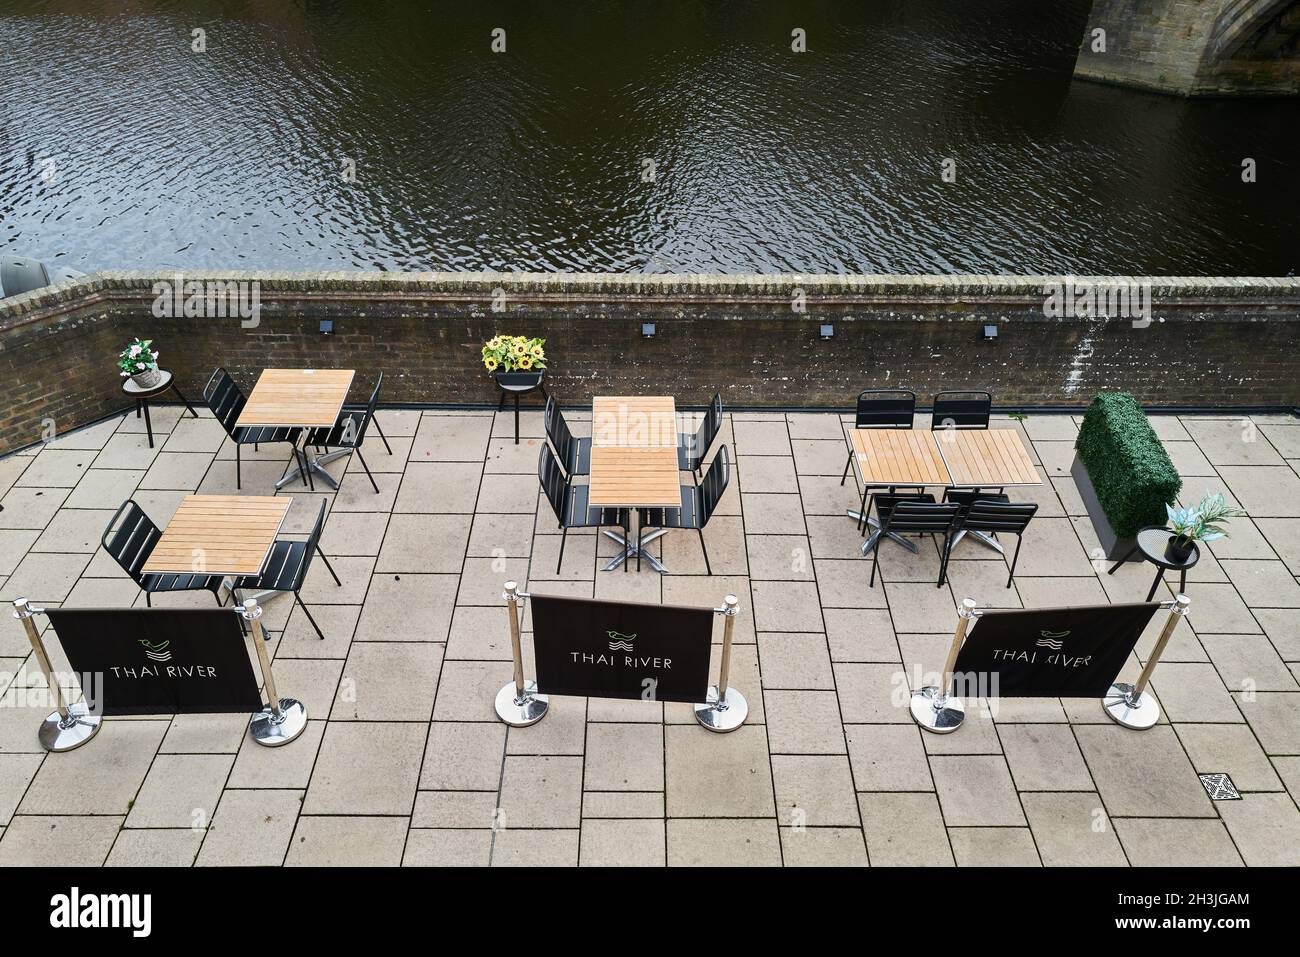 Thai River restaurant terrace on the bank of the river Wear at Durham, England. Stock Photo